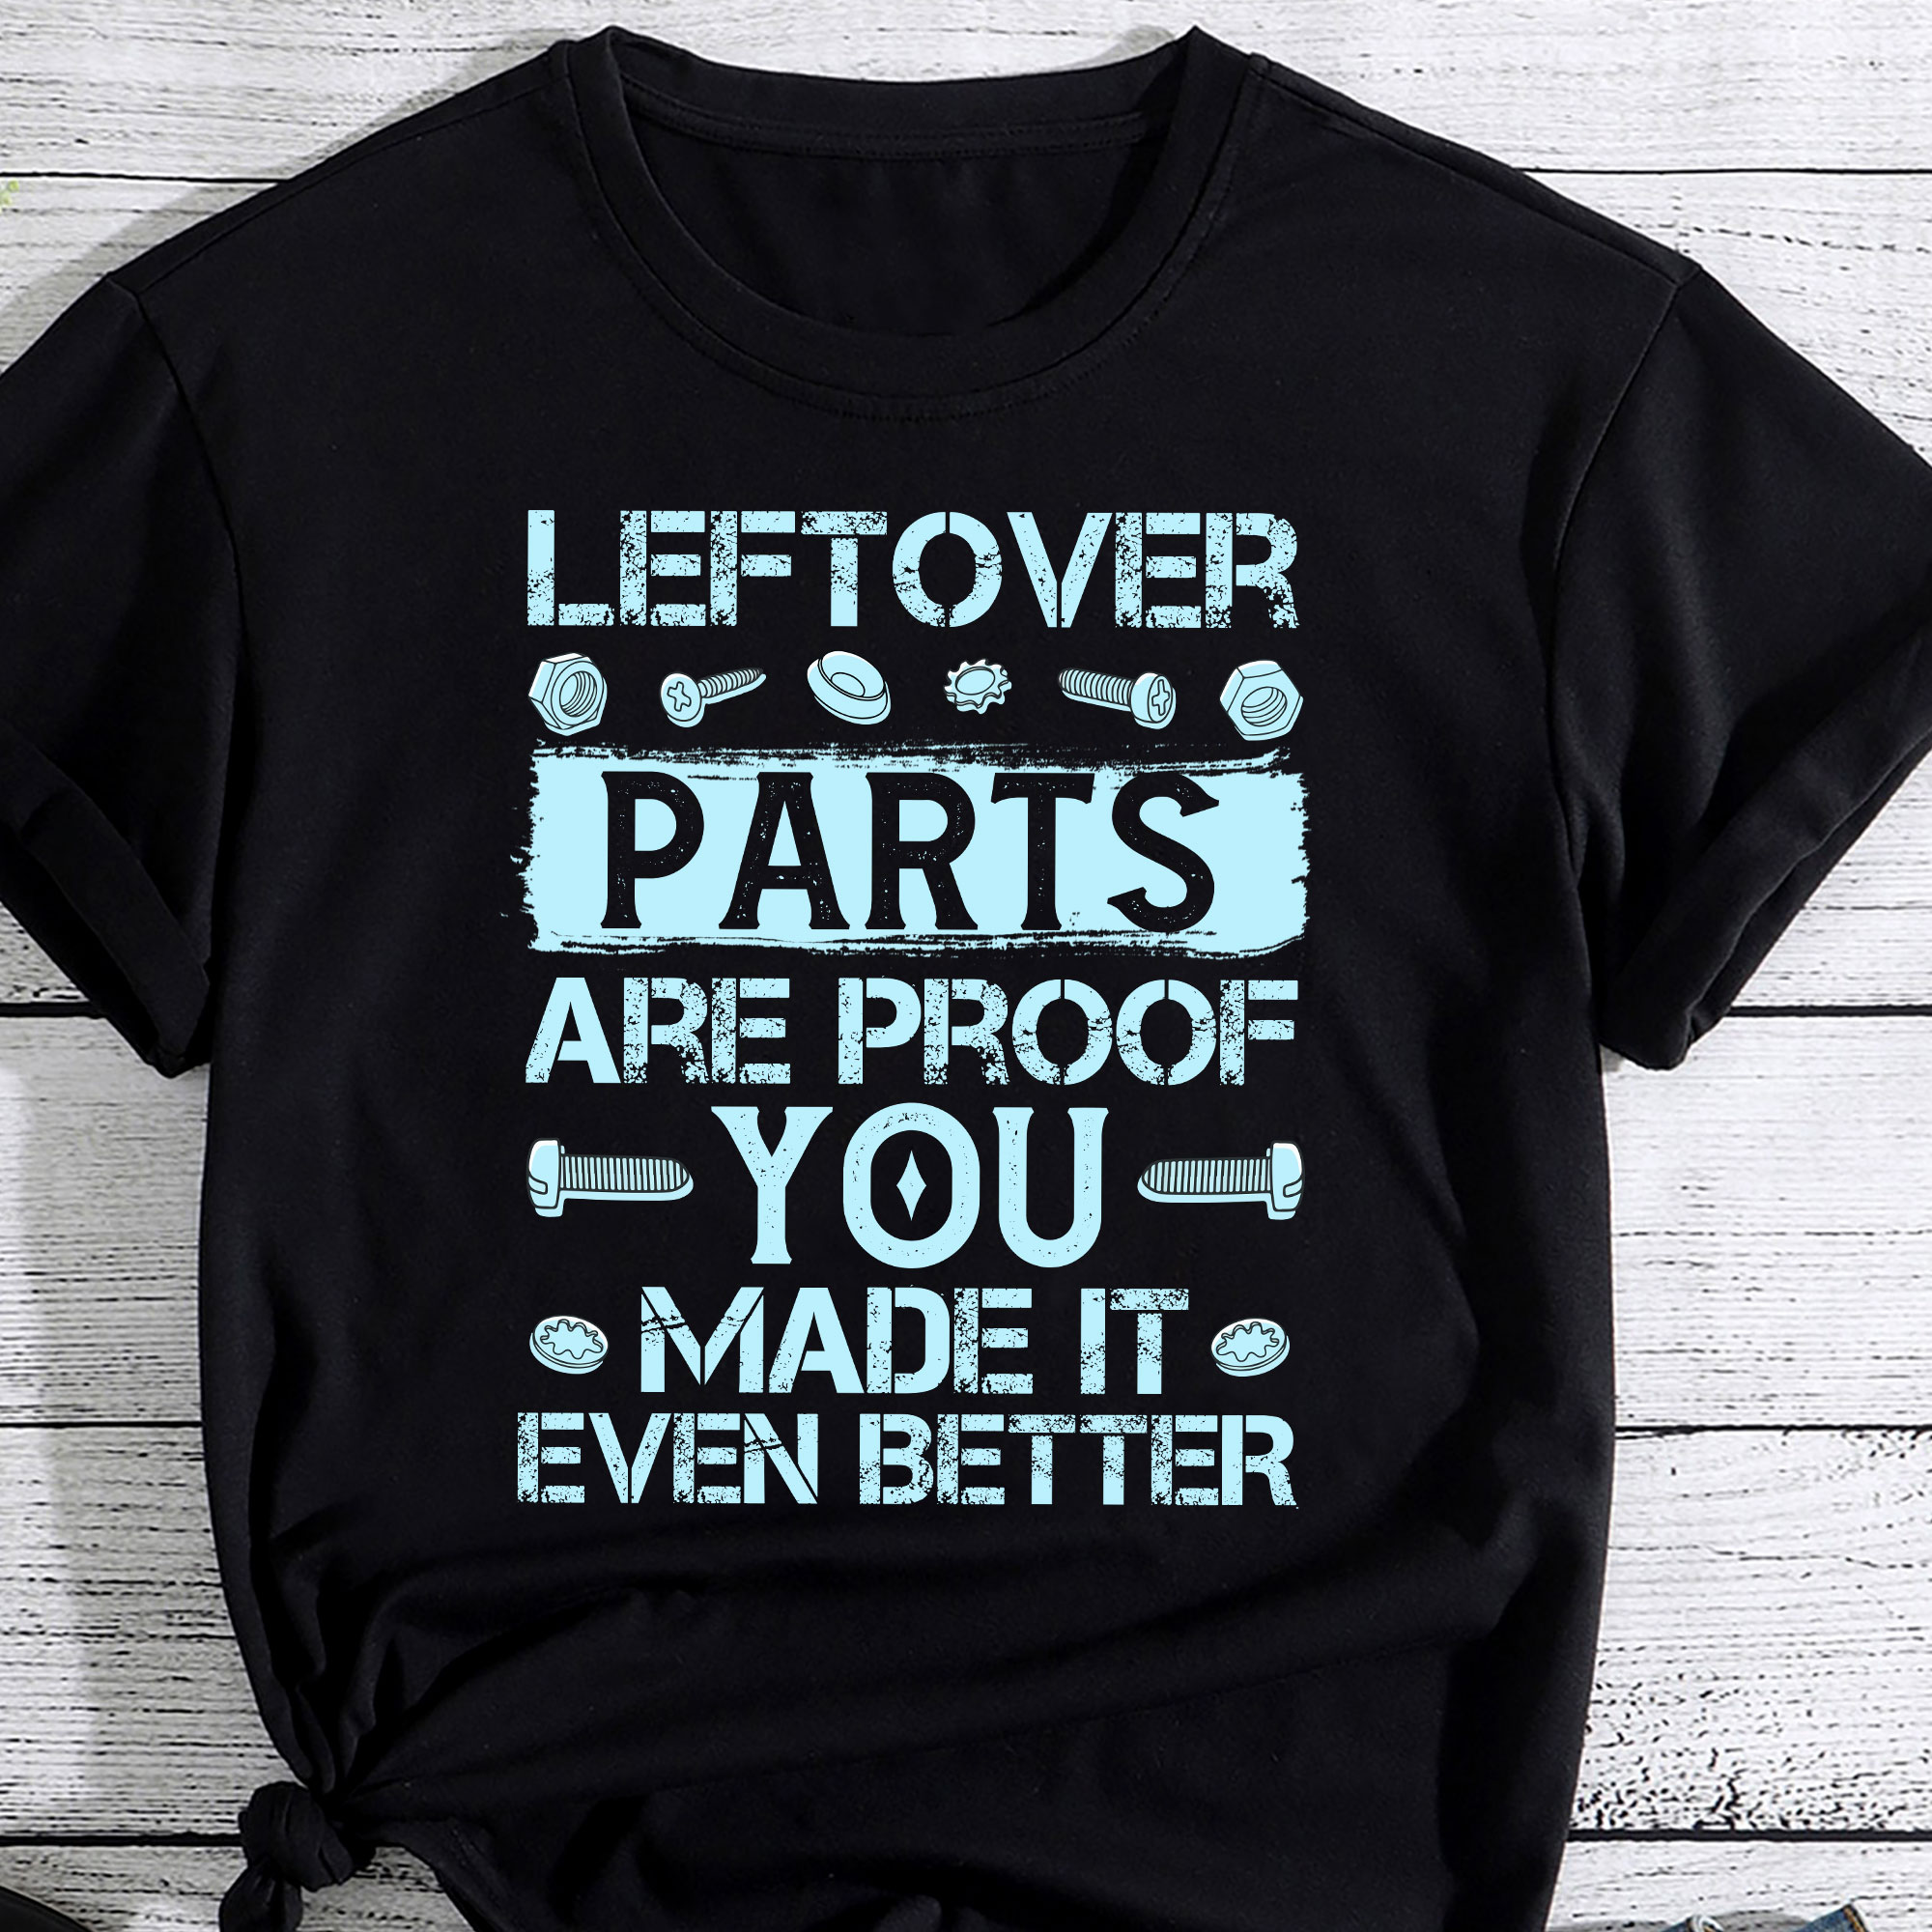 Mens Leftover Parts are proof you made it even better gift Shirt PC - Buy  t-shirt designs